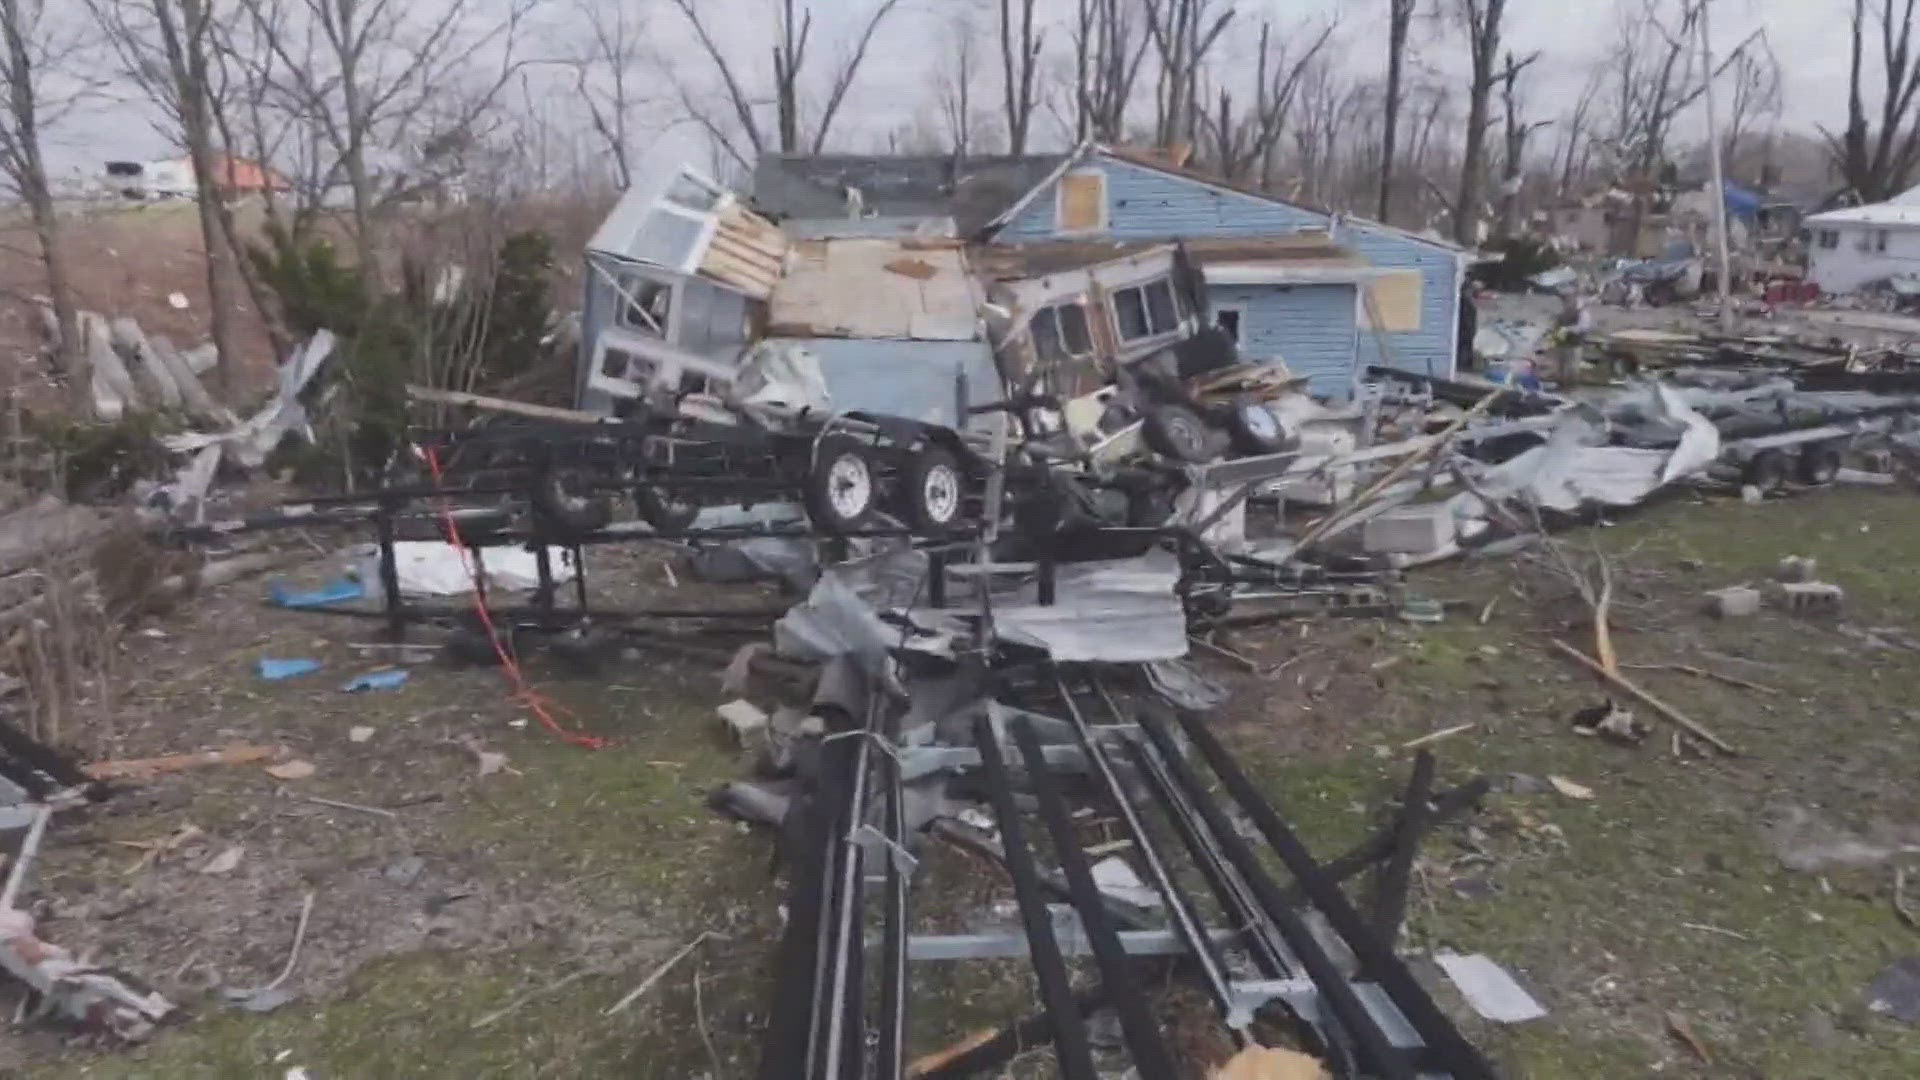 Gov. Mike DeWine asked Biden for the declaration after several tornadoes struck on March 14. Three people were killed and 38 were injured in Logan County.